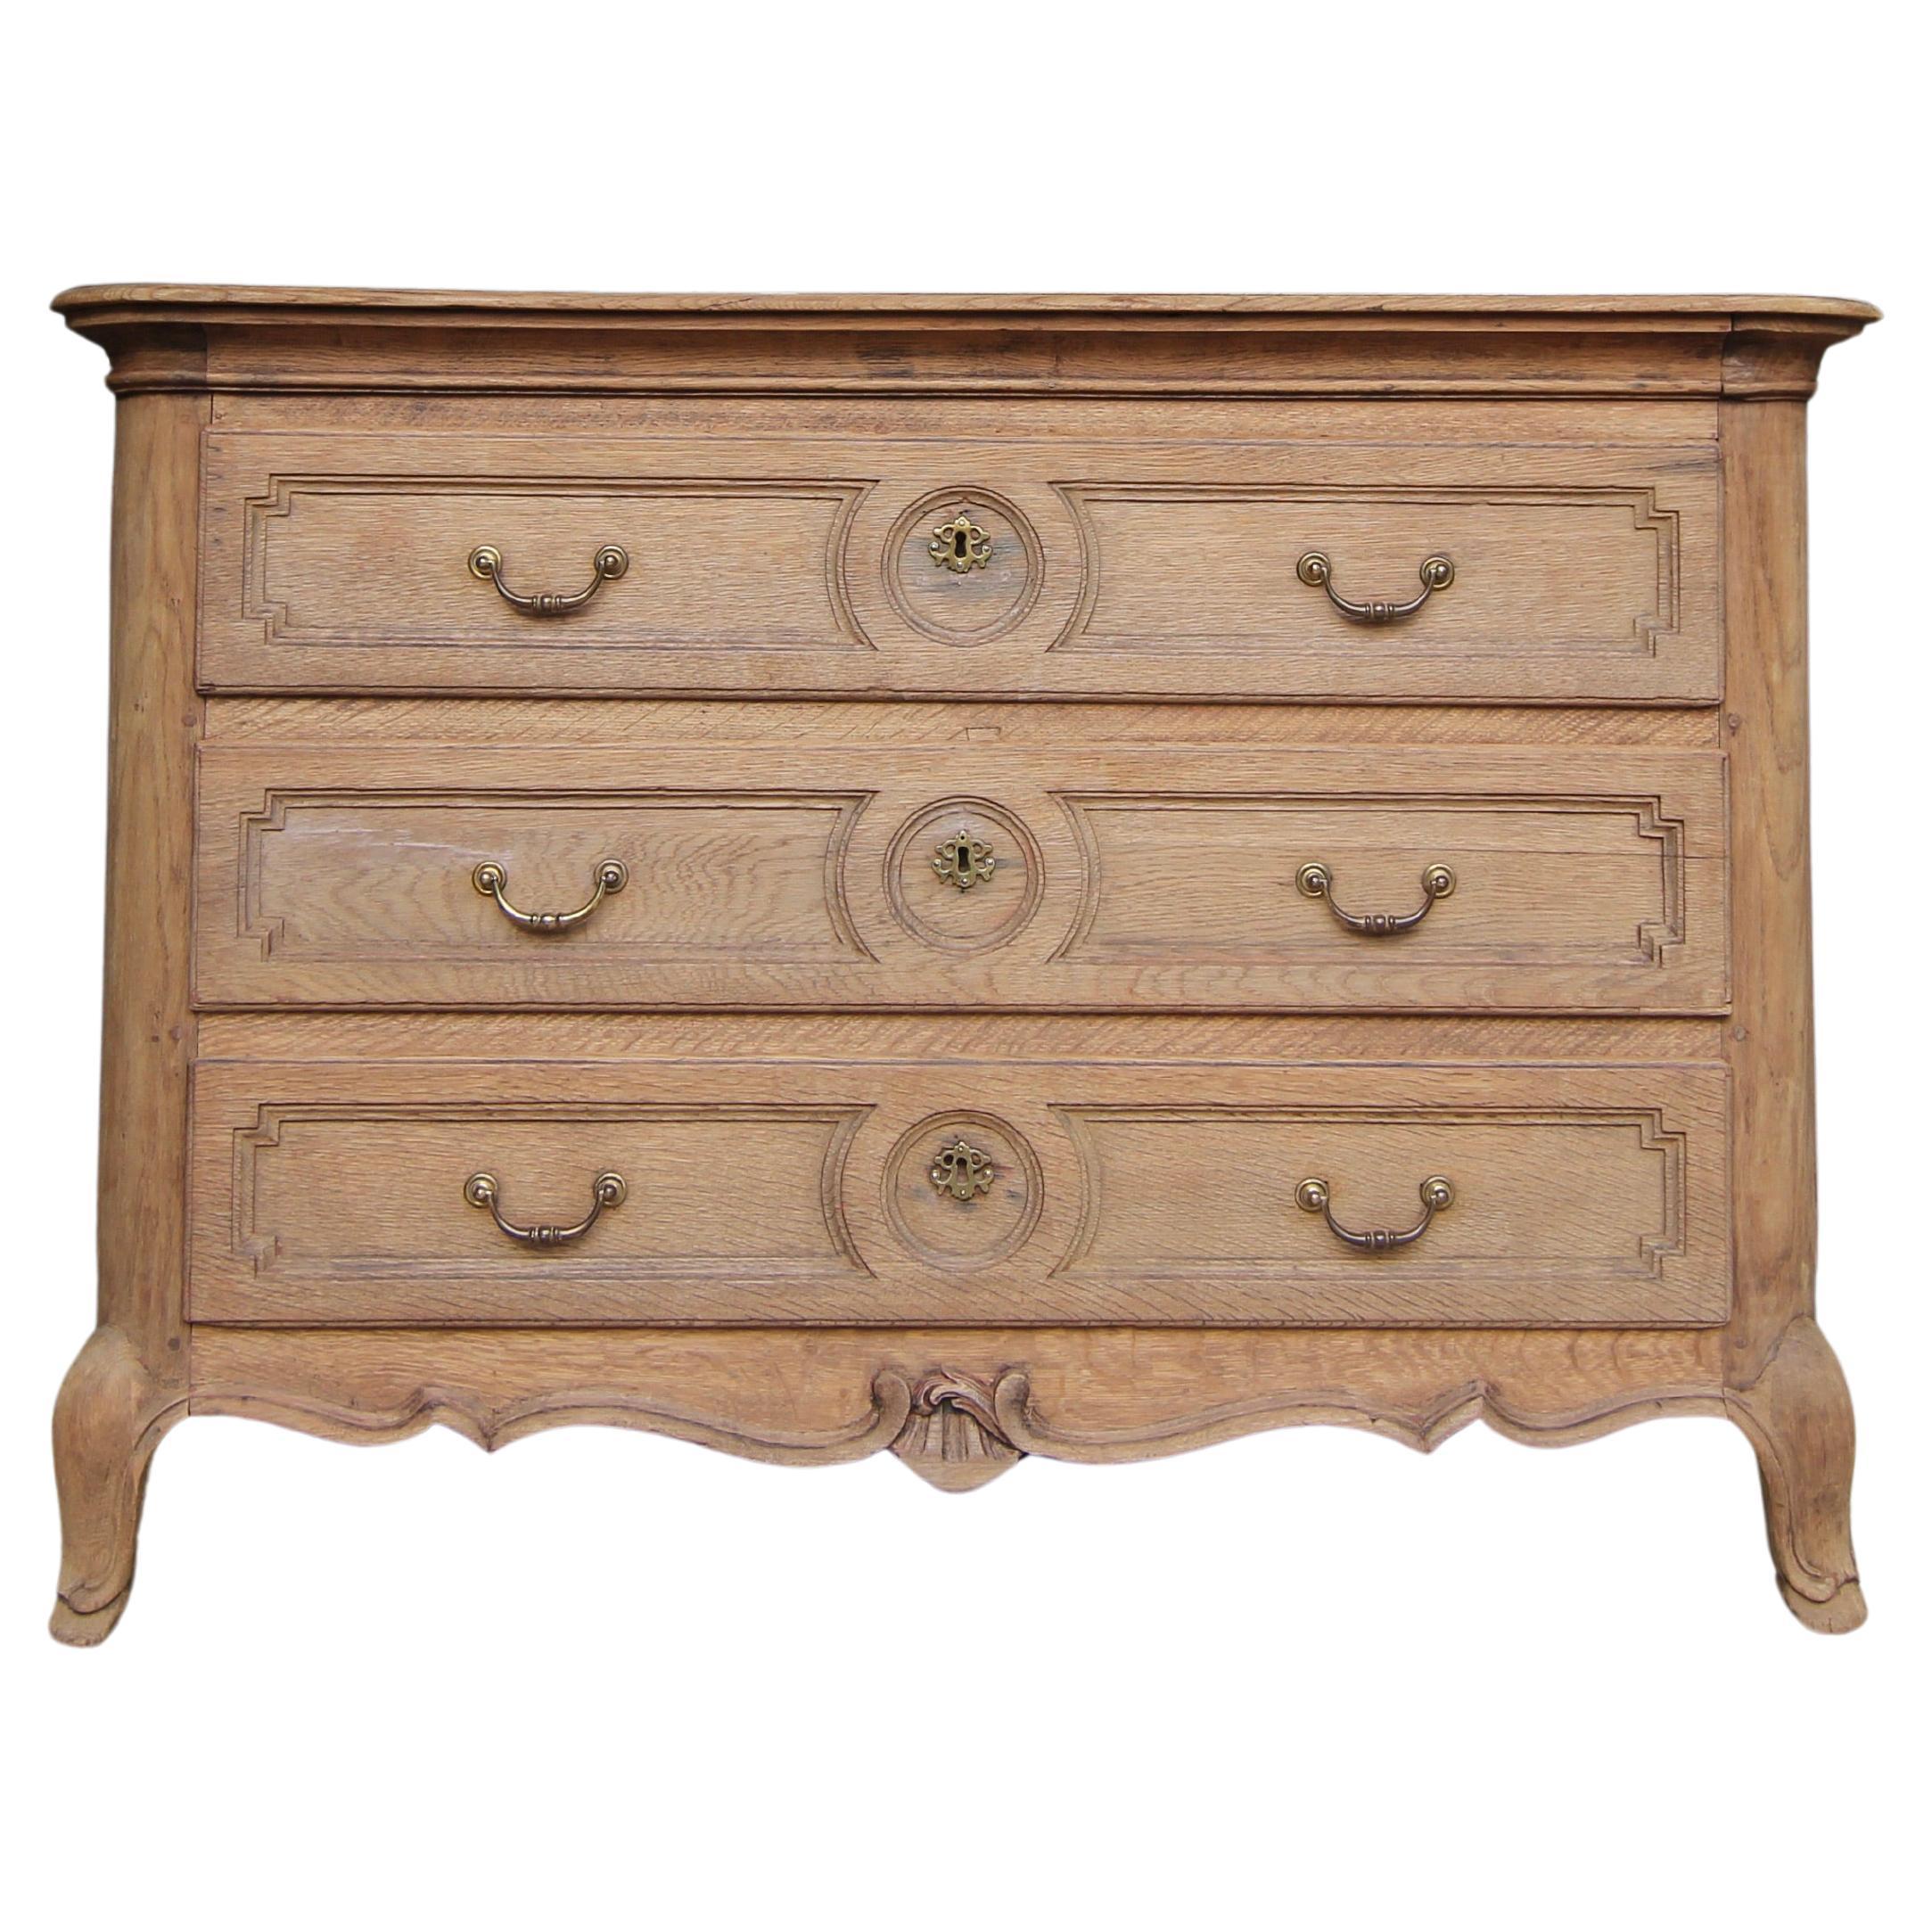 Early 19th Century Oak Chest of Drawers For Sale